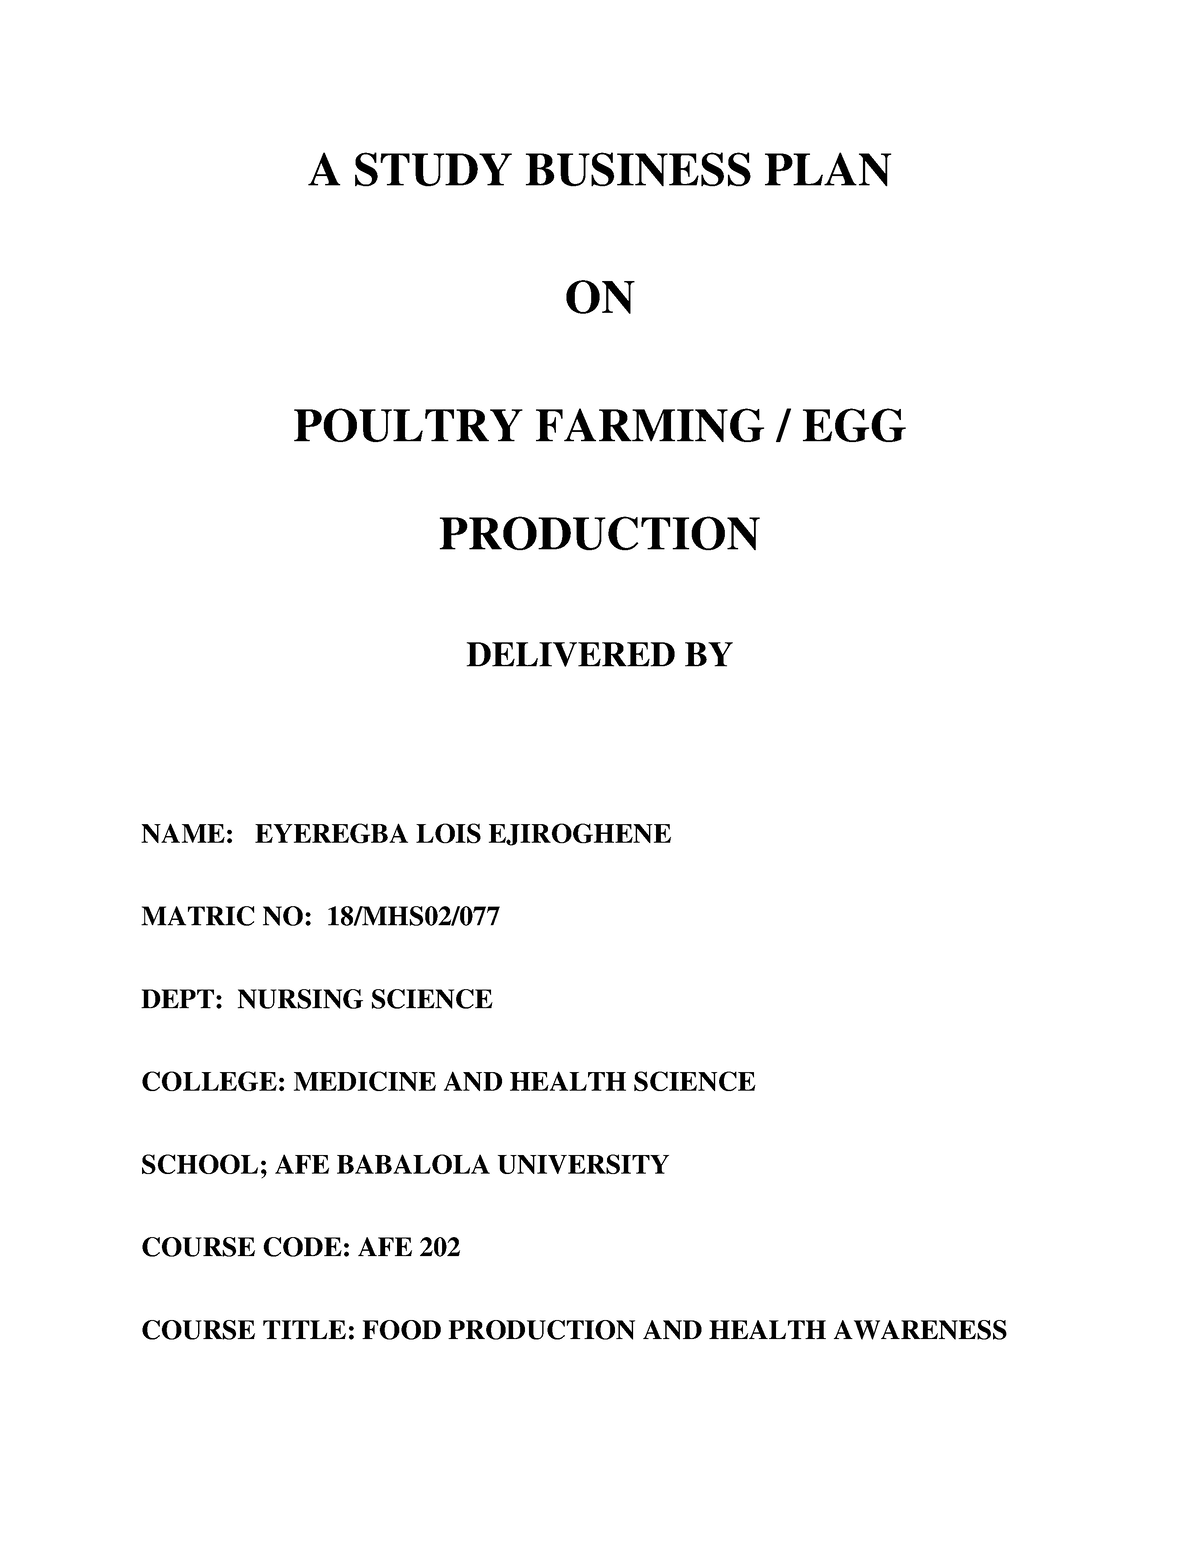 a business plan on poultry farming